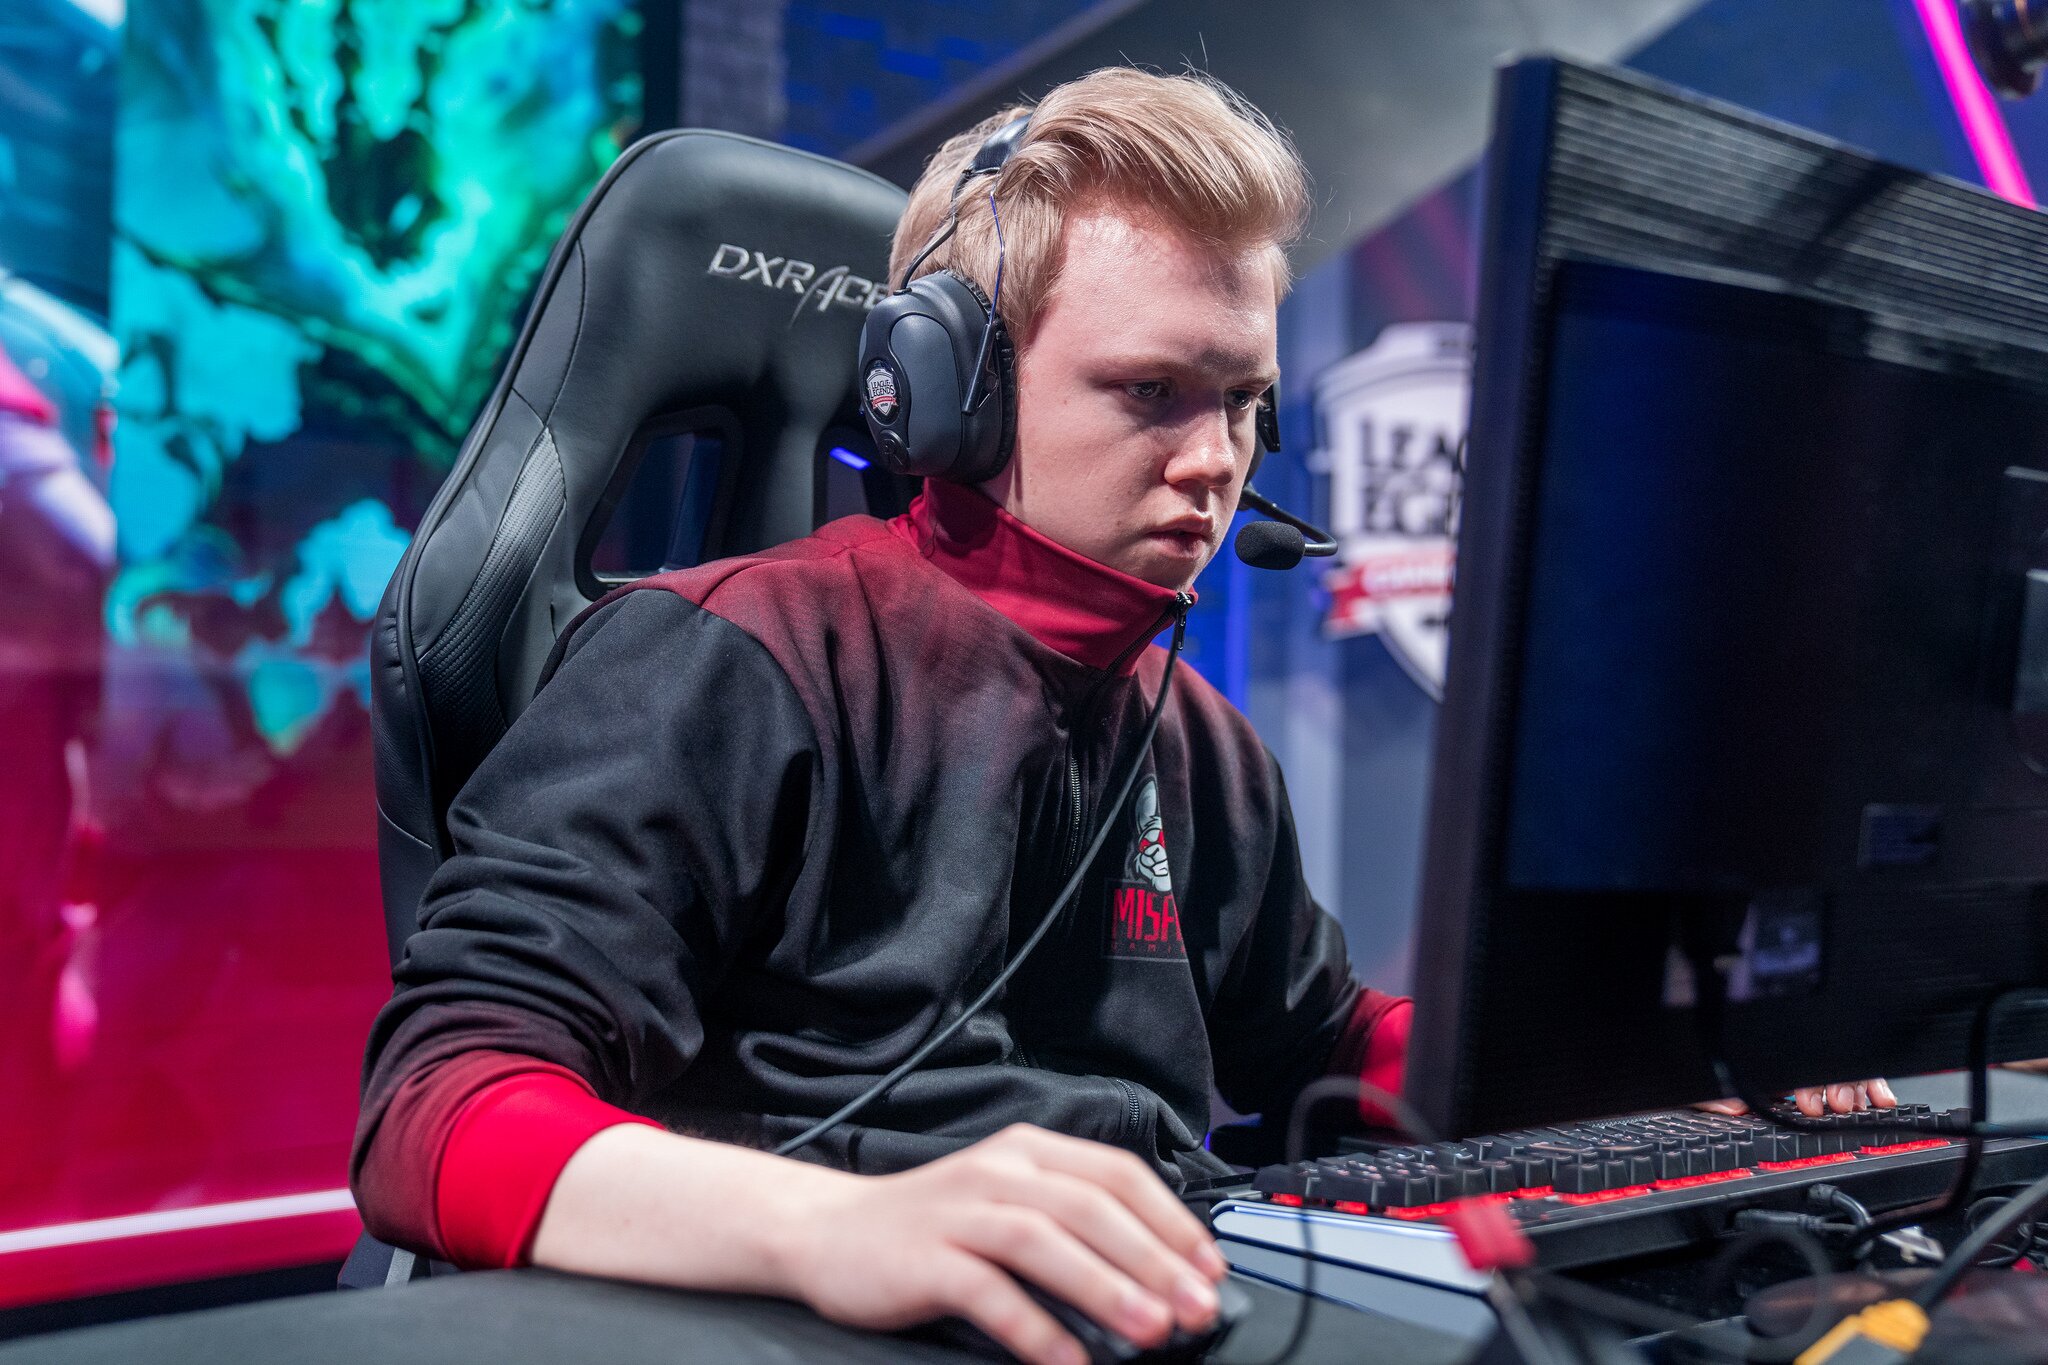 Sencux and Misfits had a tremendous season in the EU LCS but despite their best efforts they did not qualify for Worlds (Photo courtesy of Riot Games)